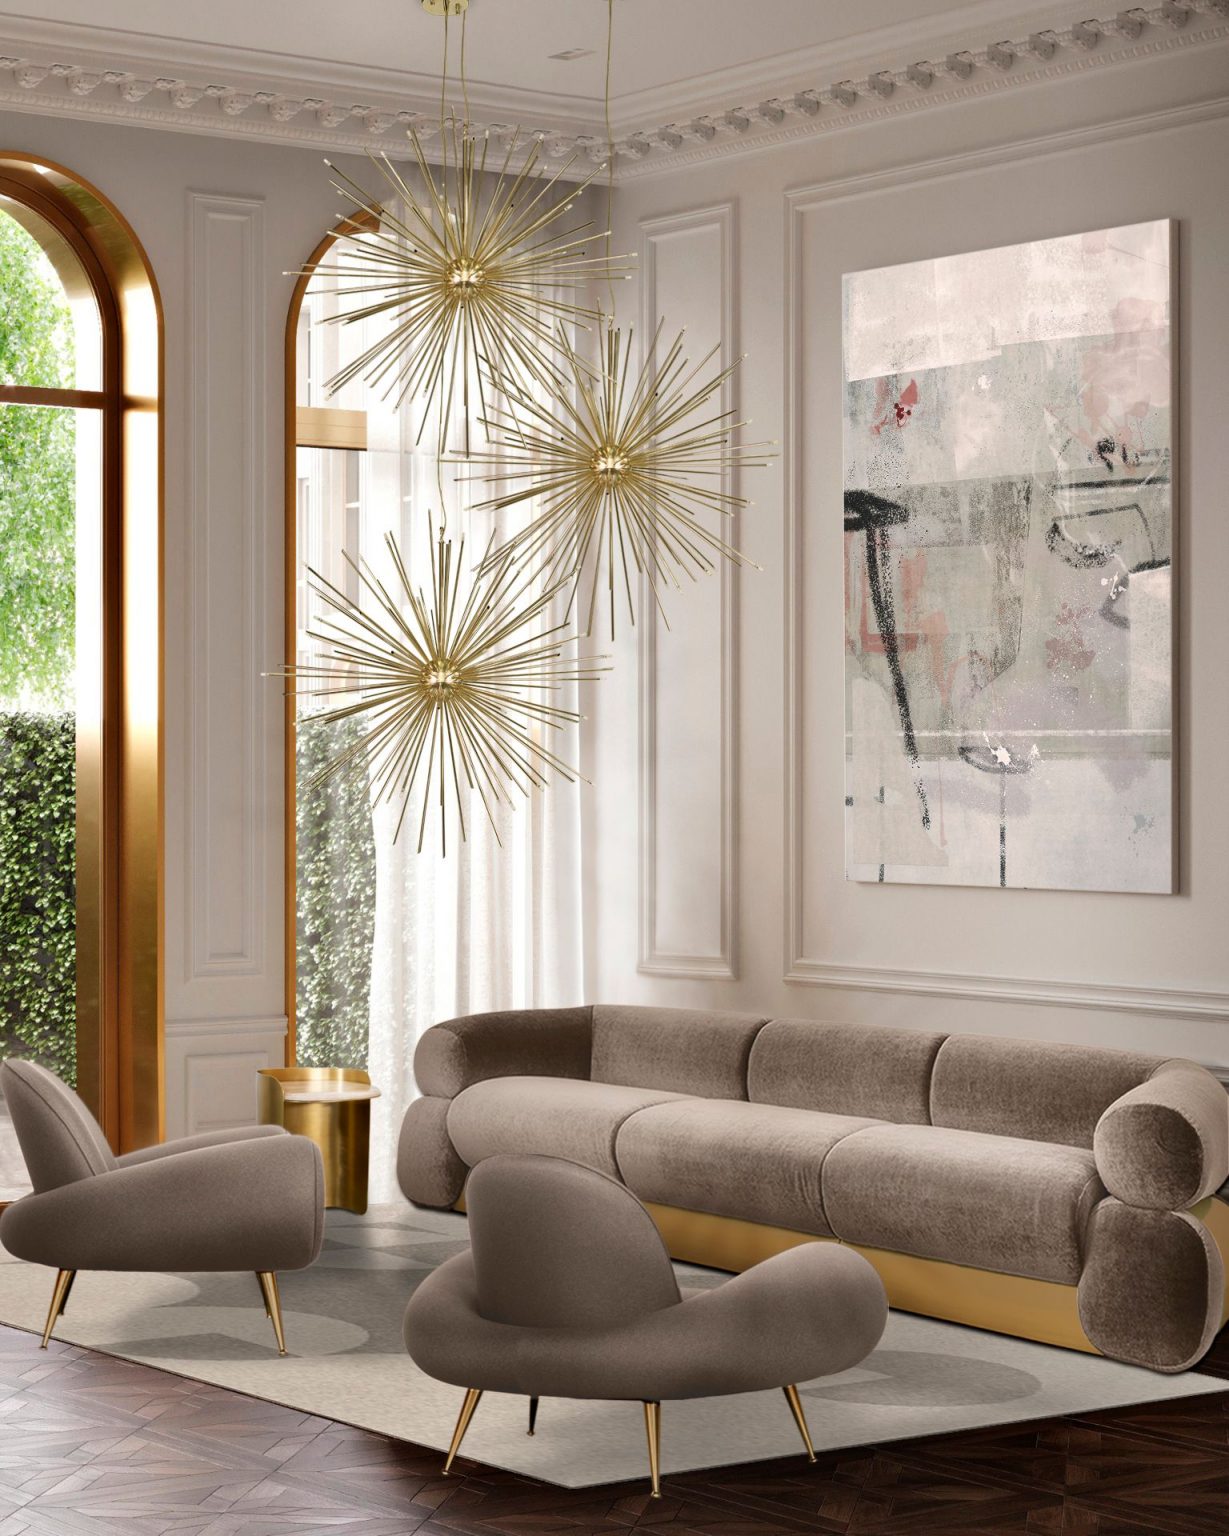 Luxury Sofas For Your Living Room